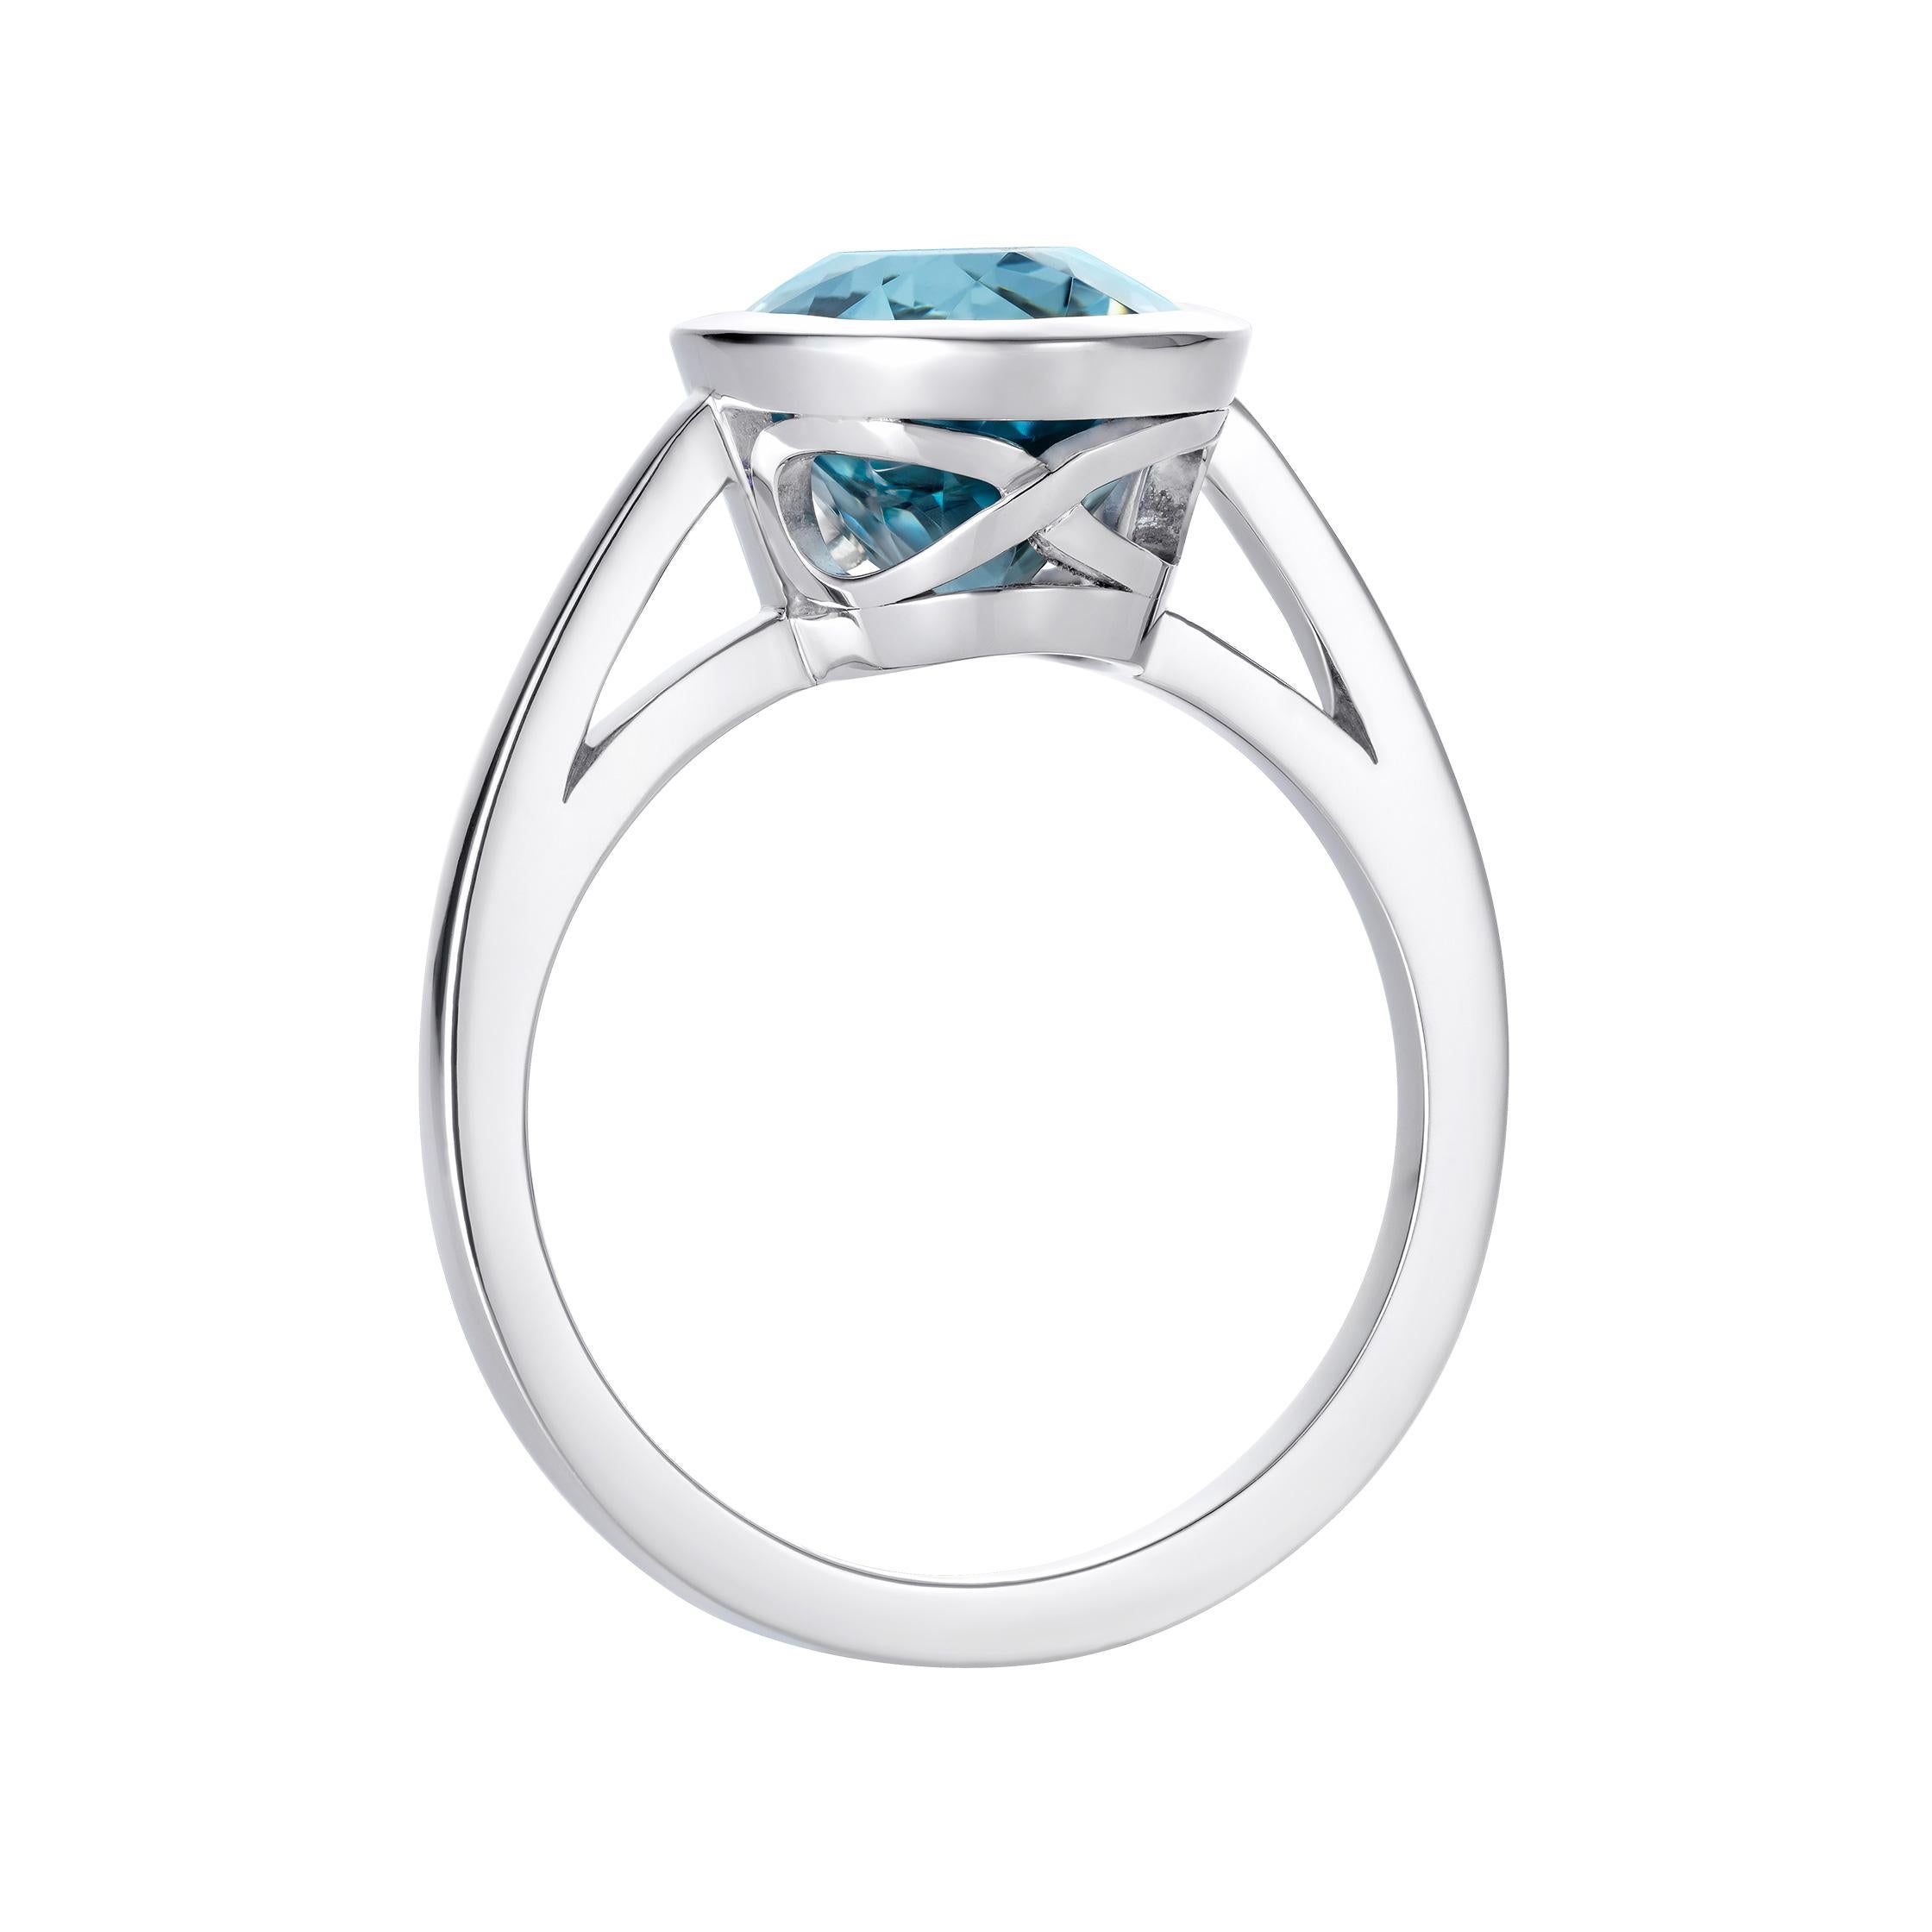 A beautiful ocean-blue aquamarine is set in our Venus setting, highlighting the beauty of this eye-catching gem.

- 3.57 carat oval aquamarine
- A Hirsh Venus setting with our infinity mark on the side
- Created in platinum, handmade in